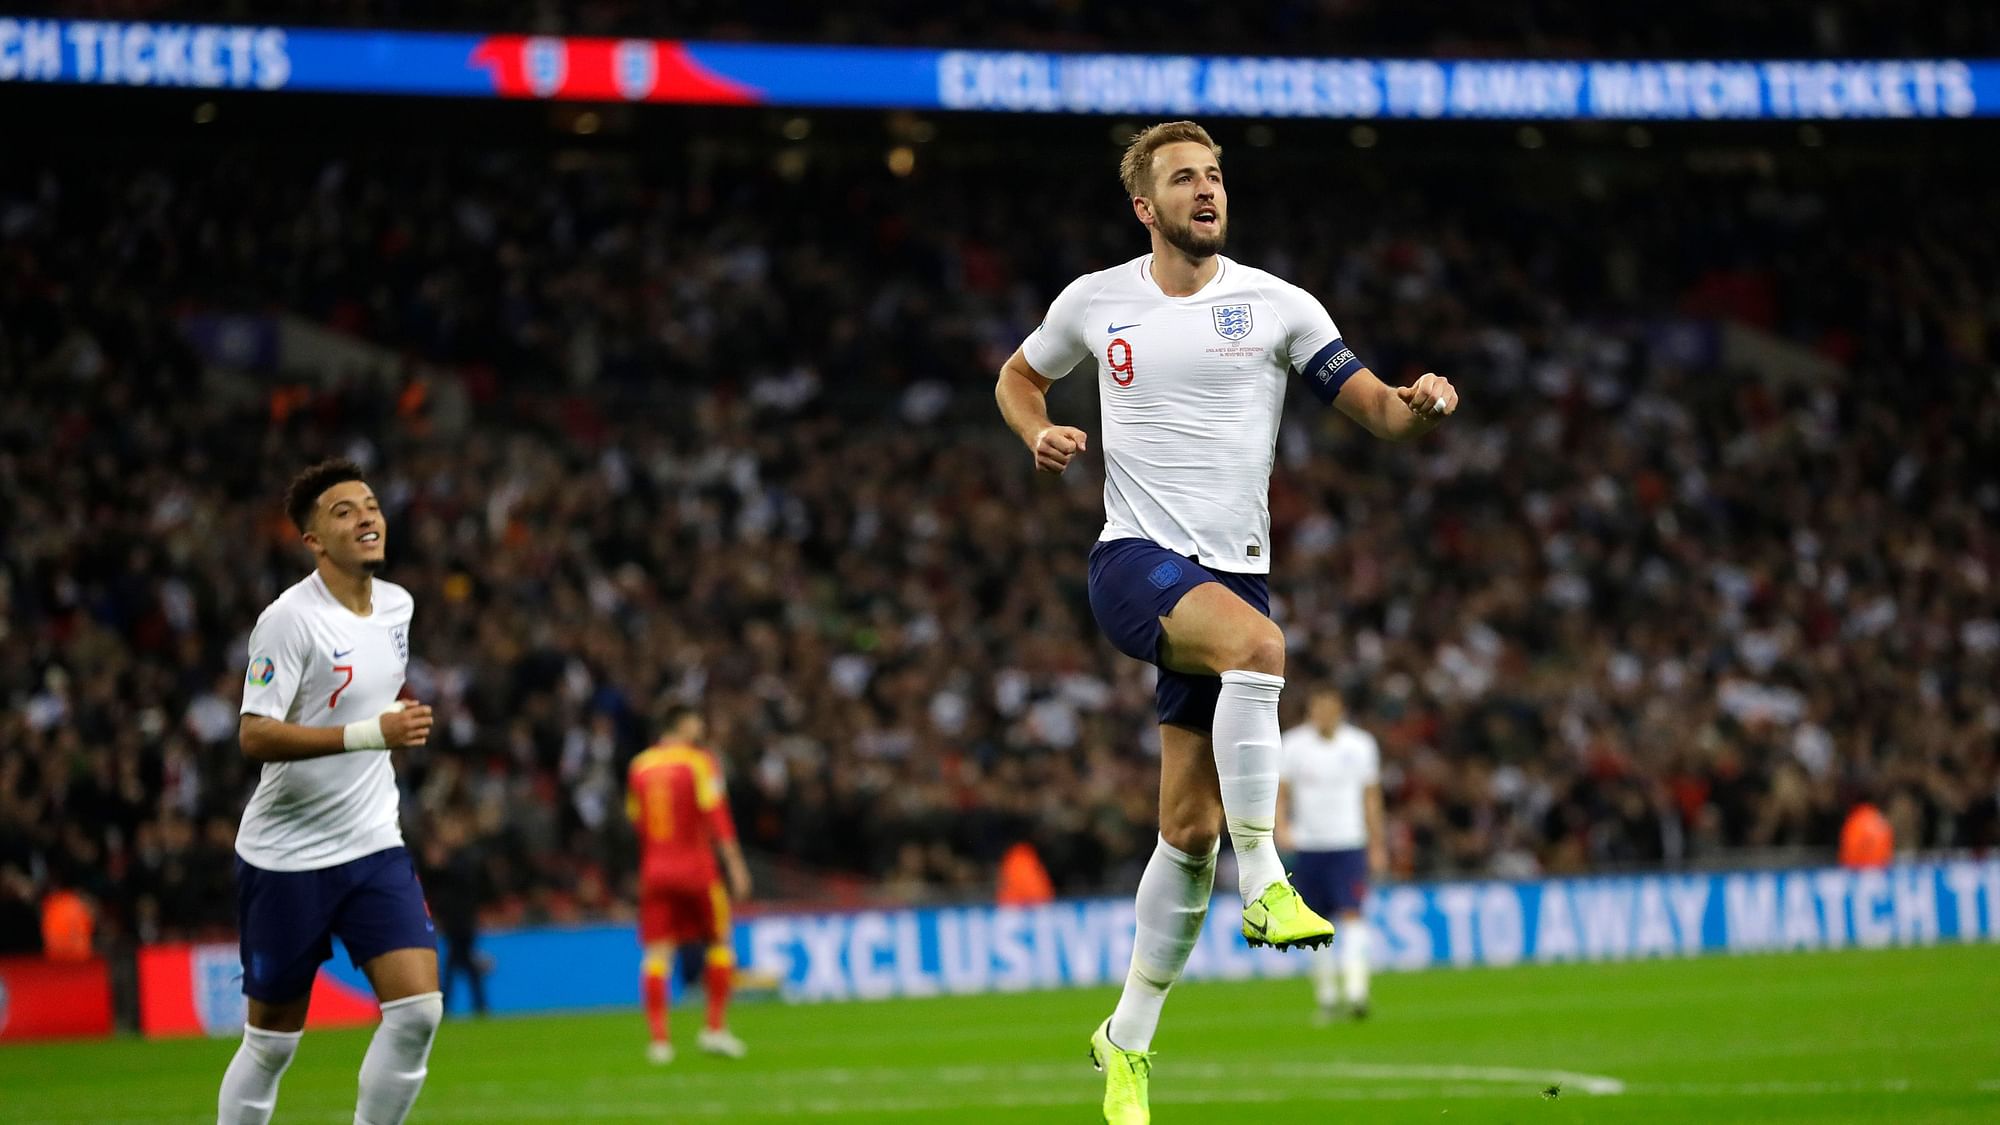 England’s Harry Kane, right, celebrates scoring the fifth goal during the Euro 2020 group A qualifying football match between England and Montenegro at Wembley stadium in London.